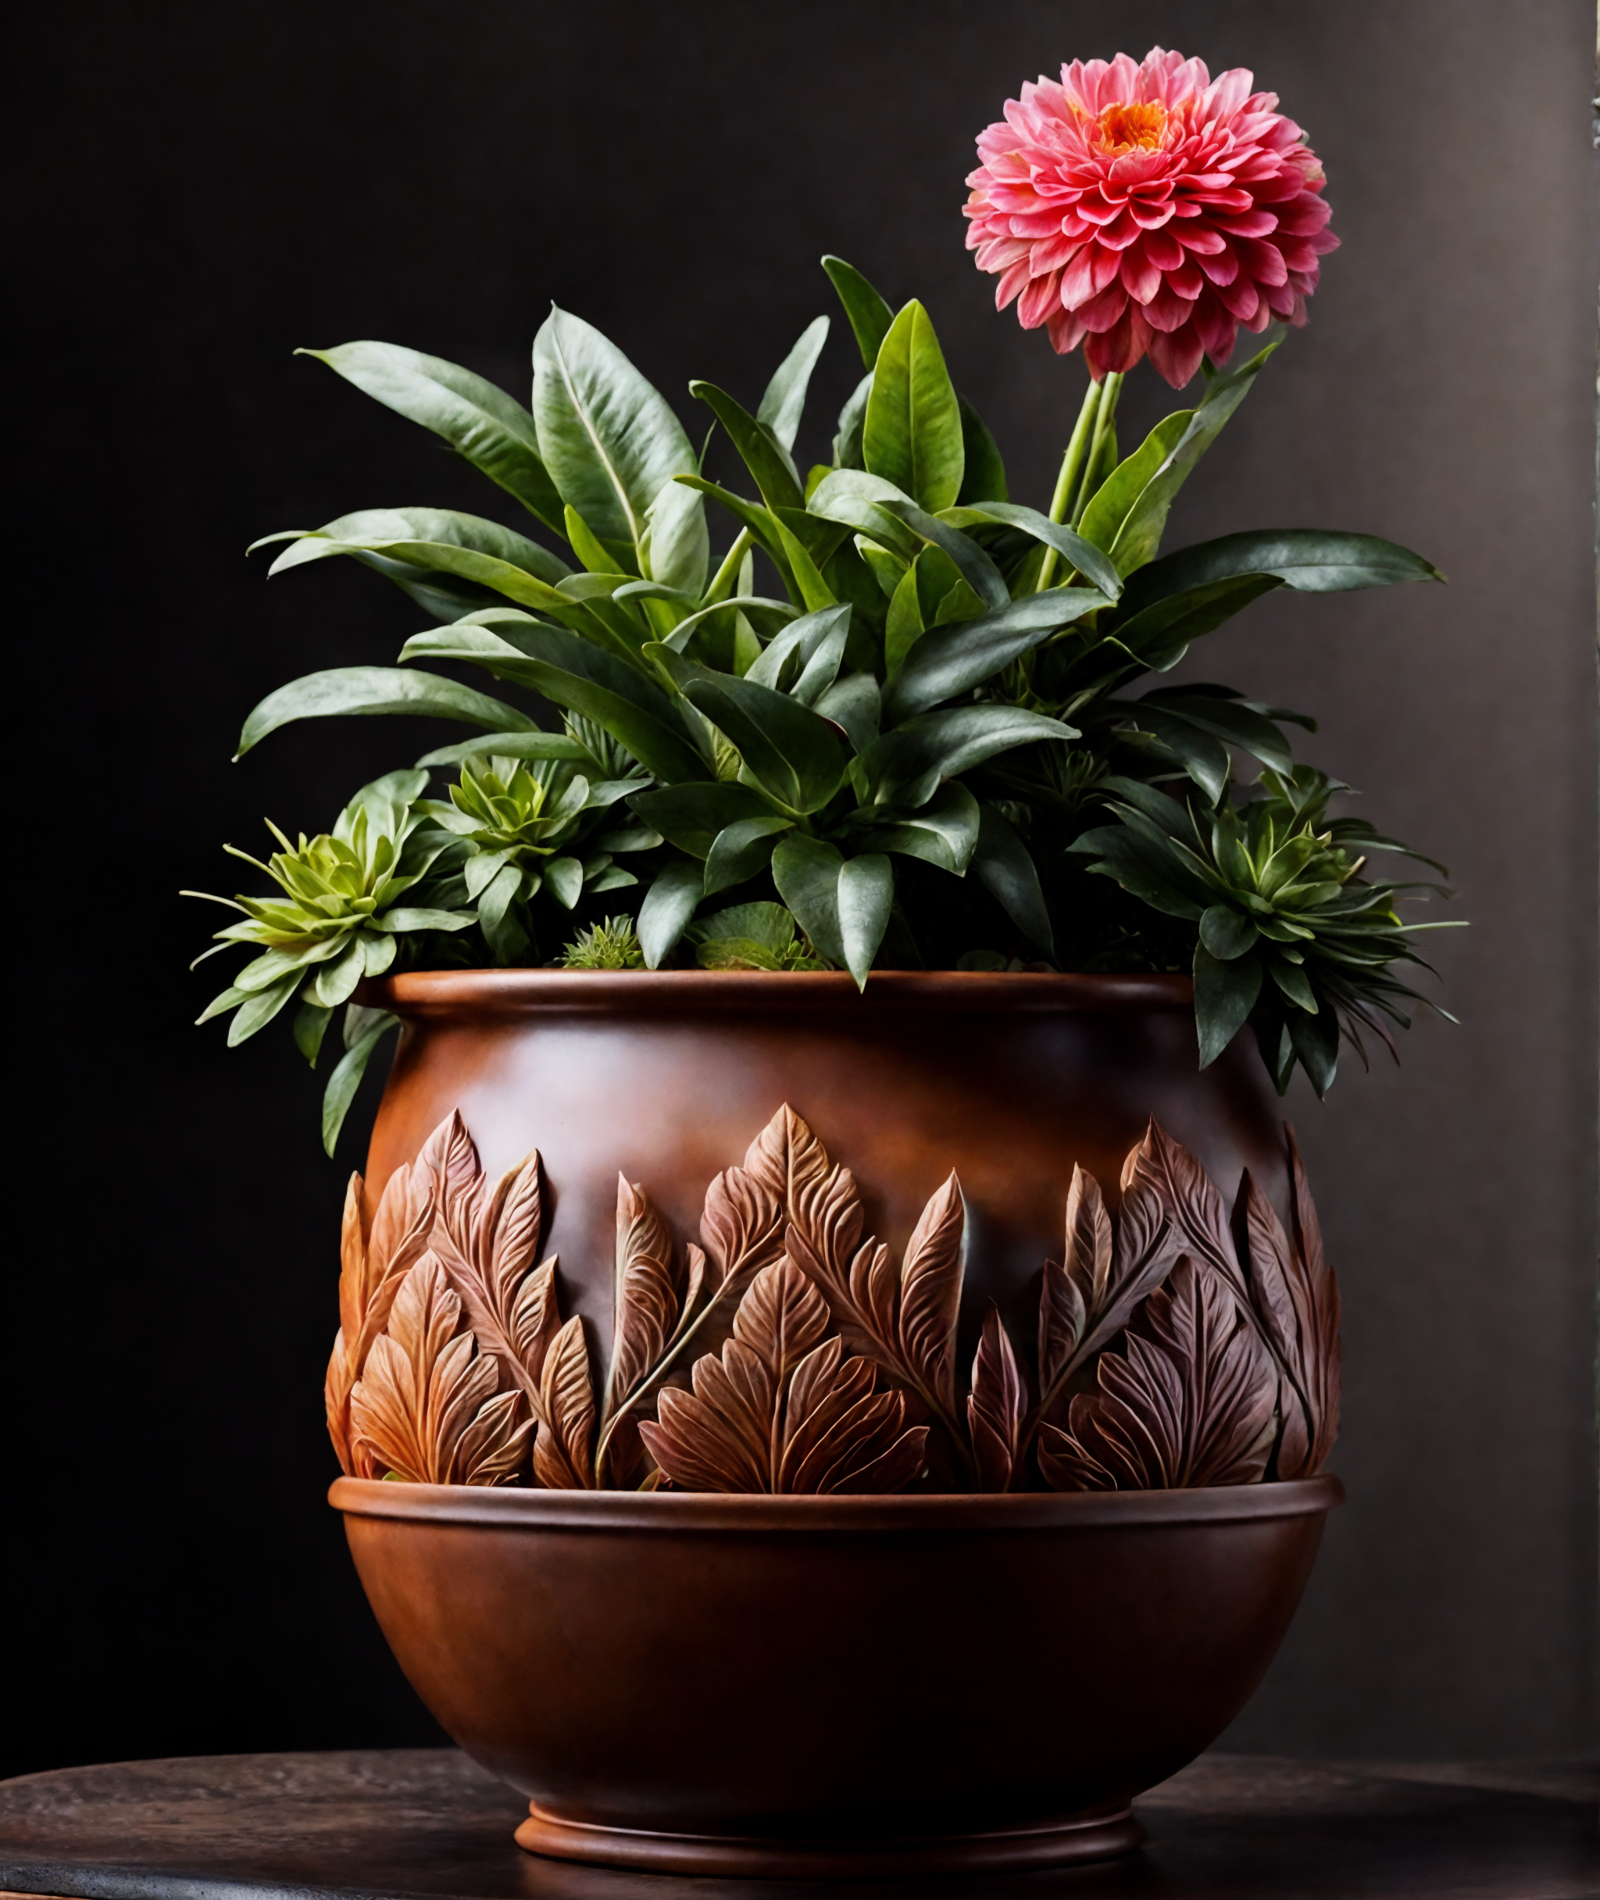 Xerochrysum bracteatum with pink blooms in a brown bowl, clear lighting, against a dark background.